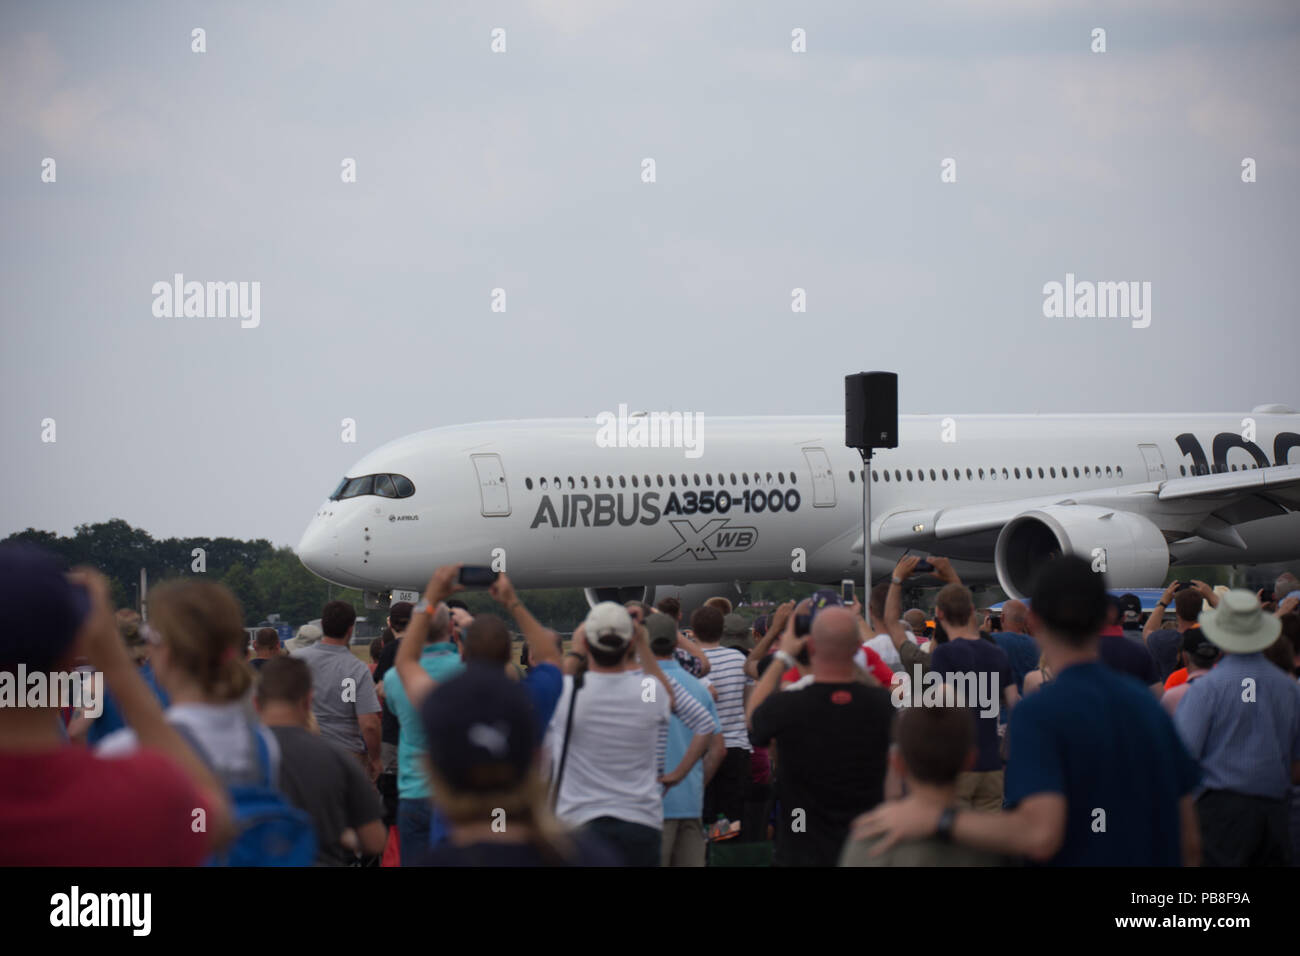 Airbus a350-1000 Foto Stock